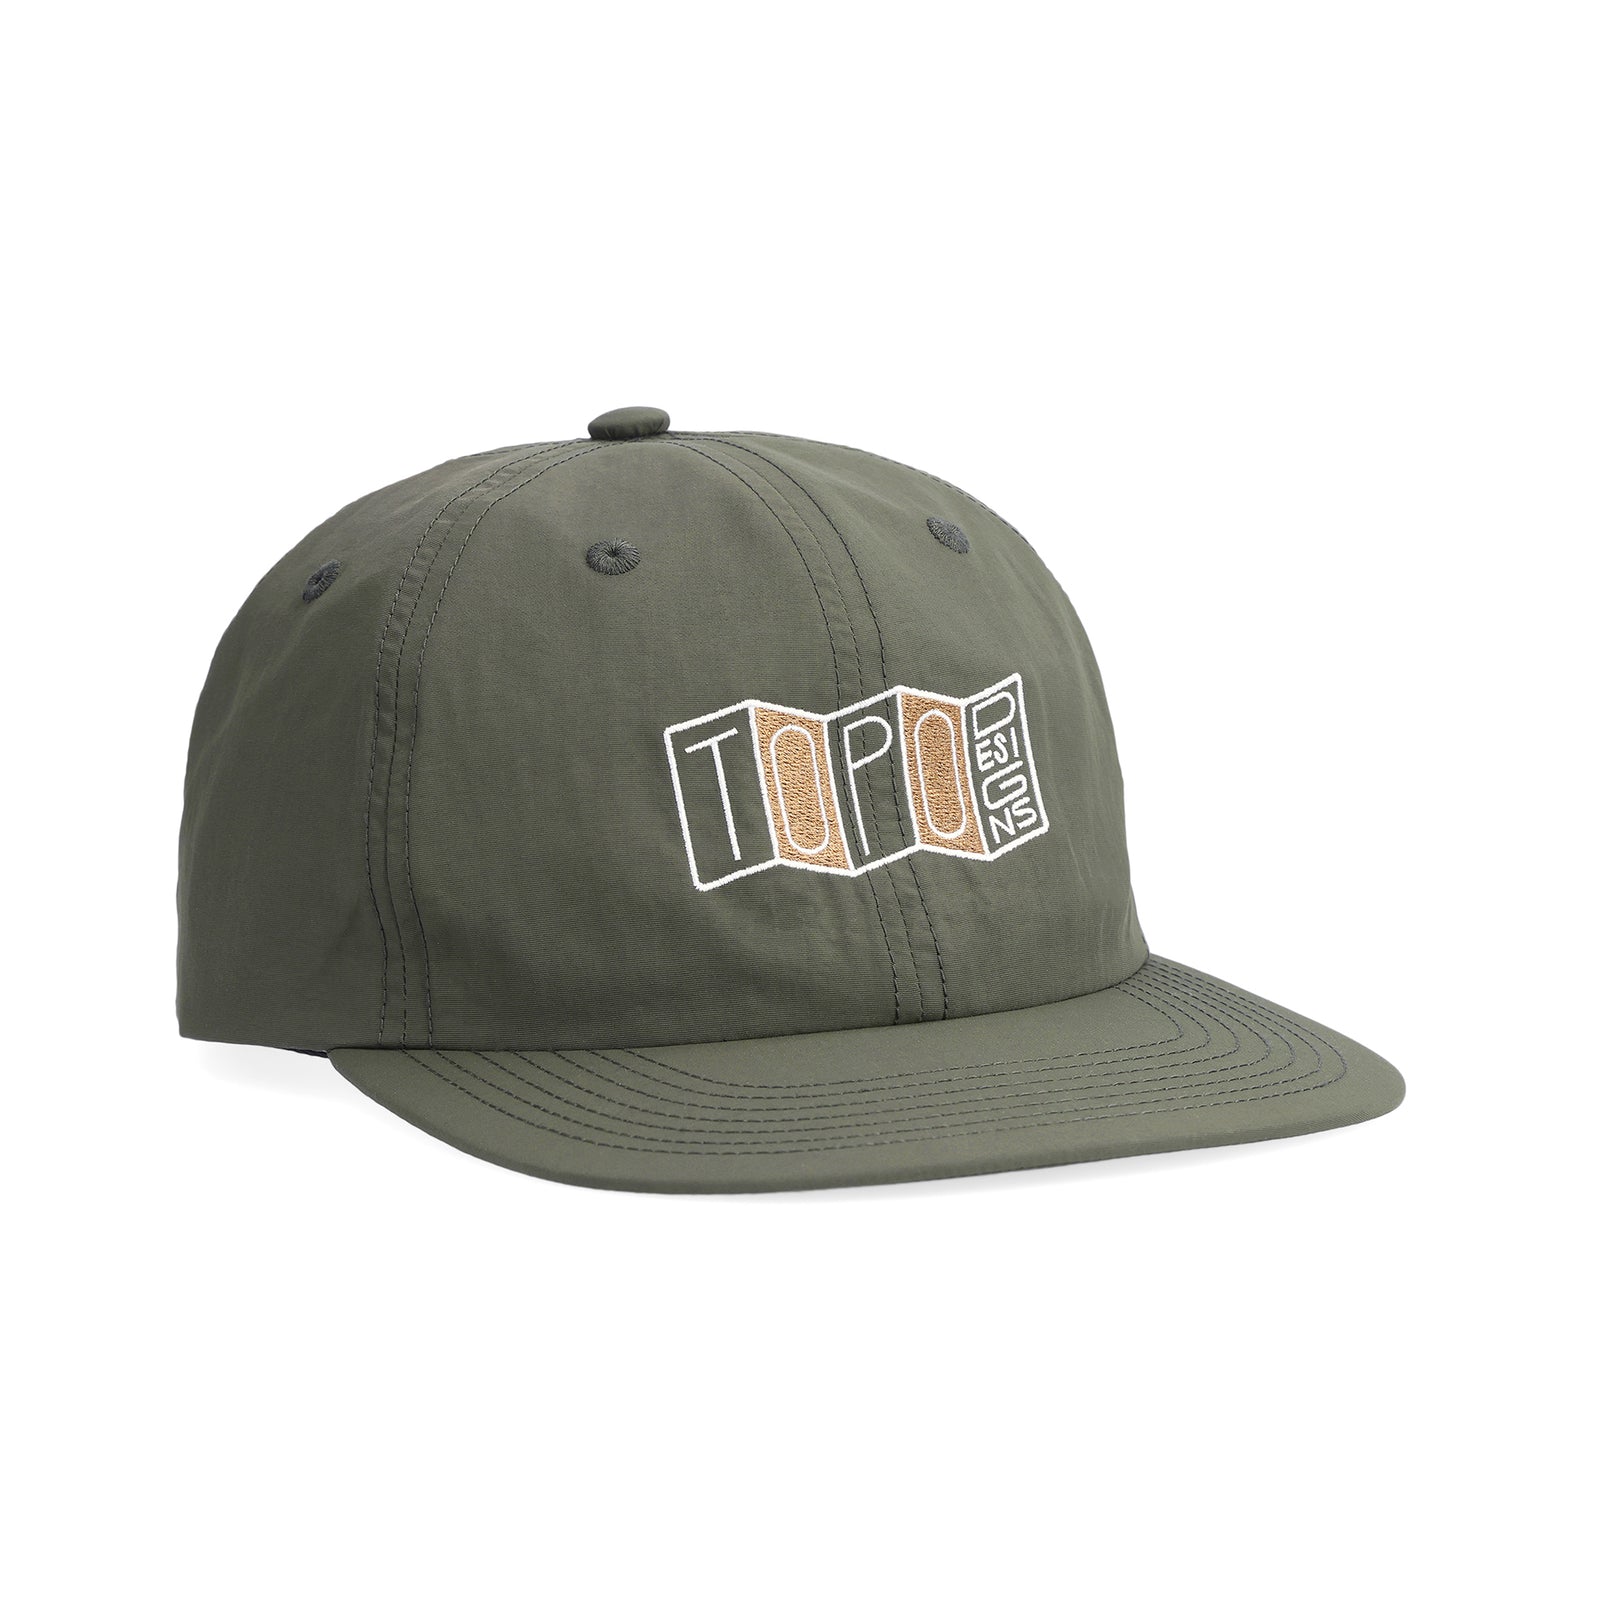 Topo Designs Nylon Ball Cap Stacked Map embroidered logo hat in "forest" green